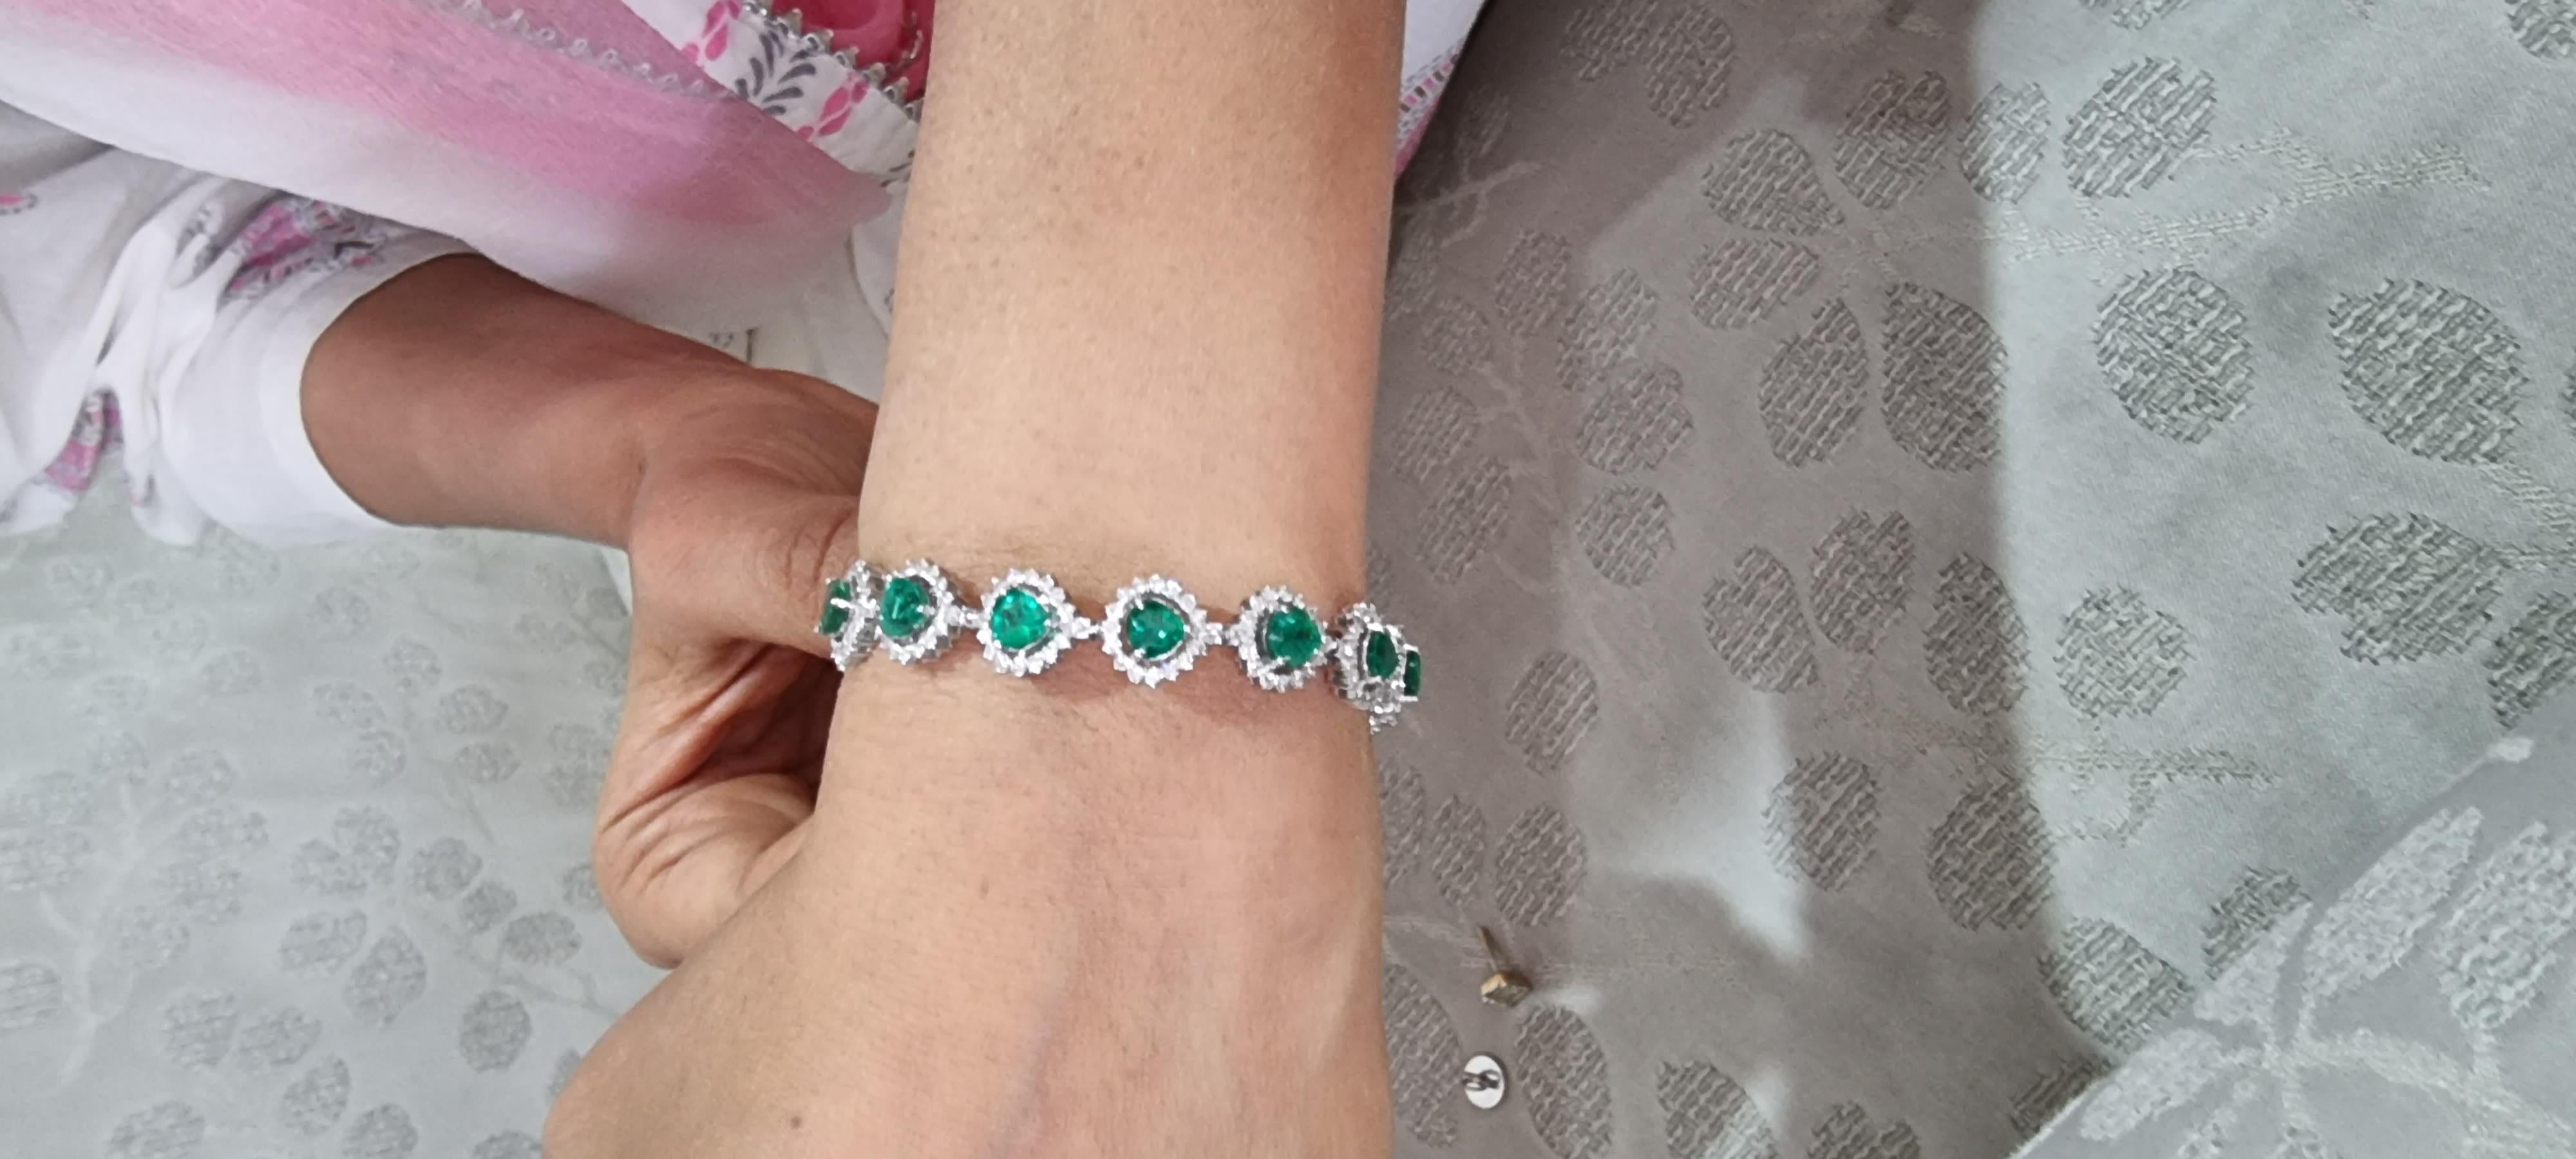 This is an awesome natural Zambian bracelet which has very high quality emeralds and  very good quality diamonds which are vsi clarity and G colour

emeralds : 7.42 cts
diamonds : 3 cts
gold : 14.79 gms

Its very hard to capture the true color and